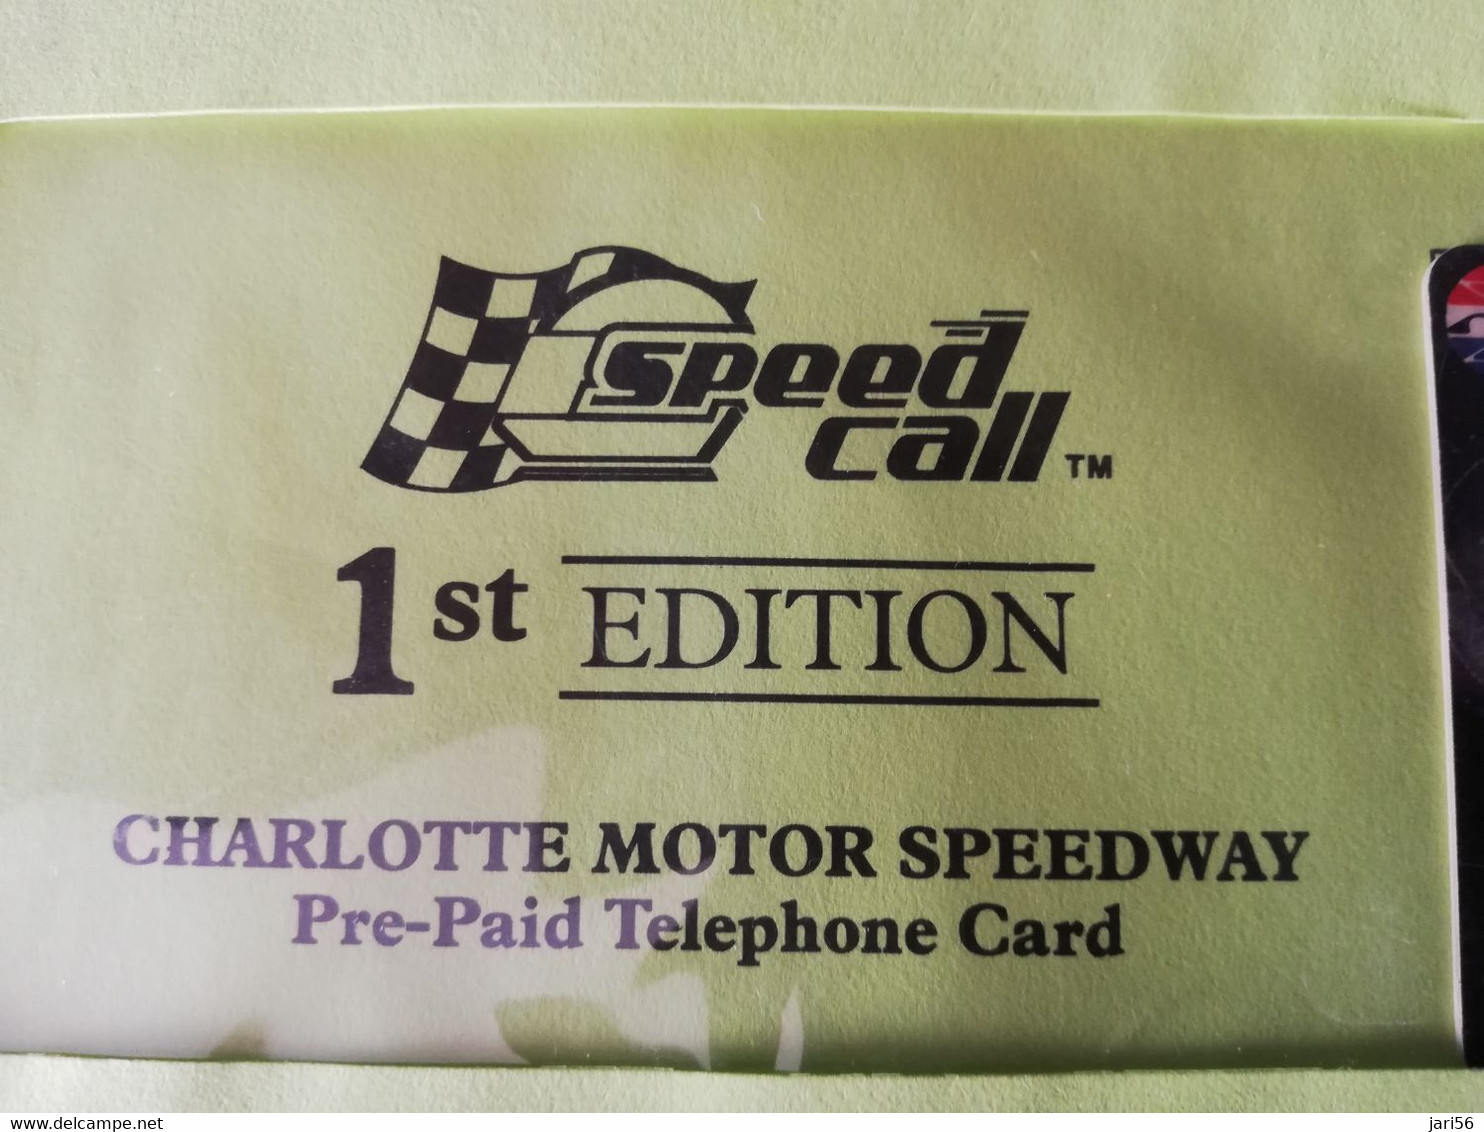 UNITED STATES /MELLOYELLO500/ SPEEDCALL/1ST EDITION  $5,-   MINT IN SEALED COVER    LIMITED EDITION ** 9399** - Sammlungen